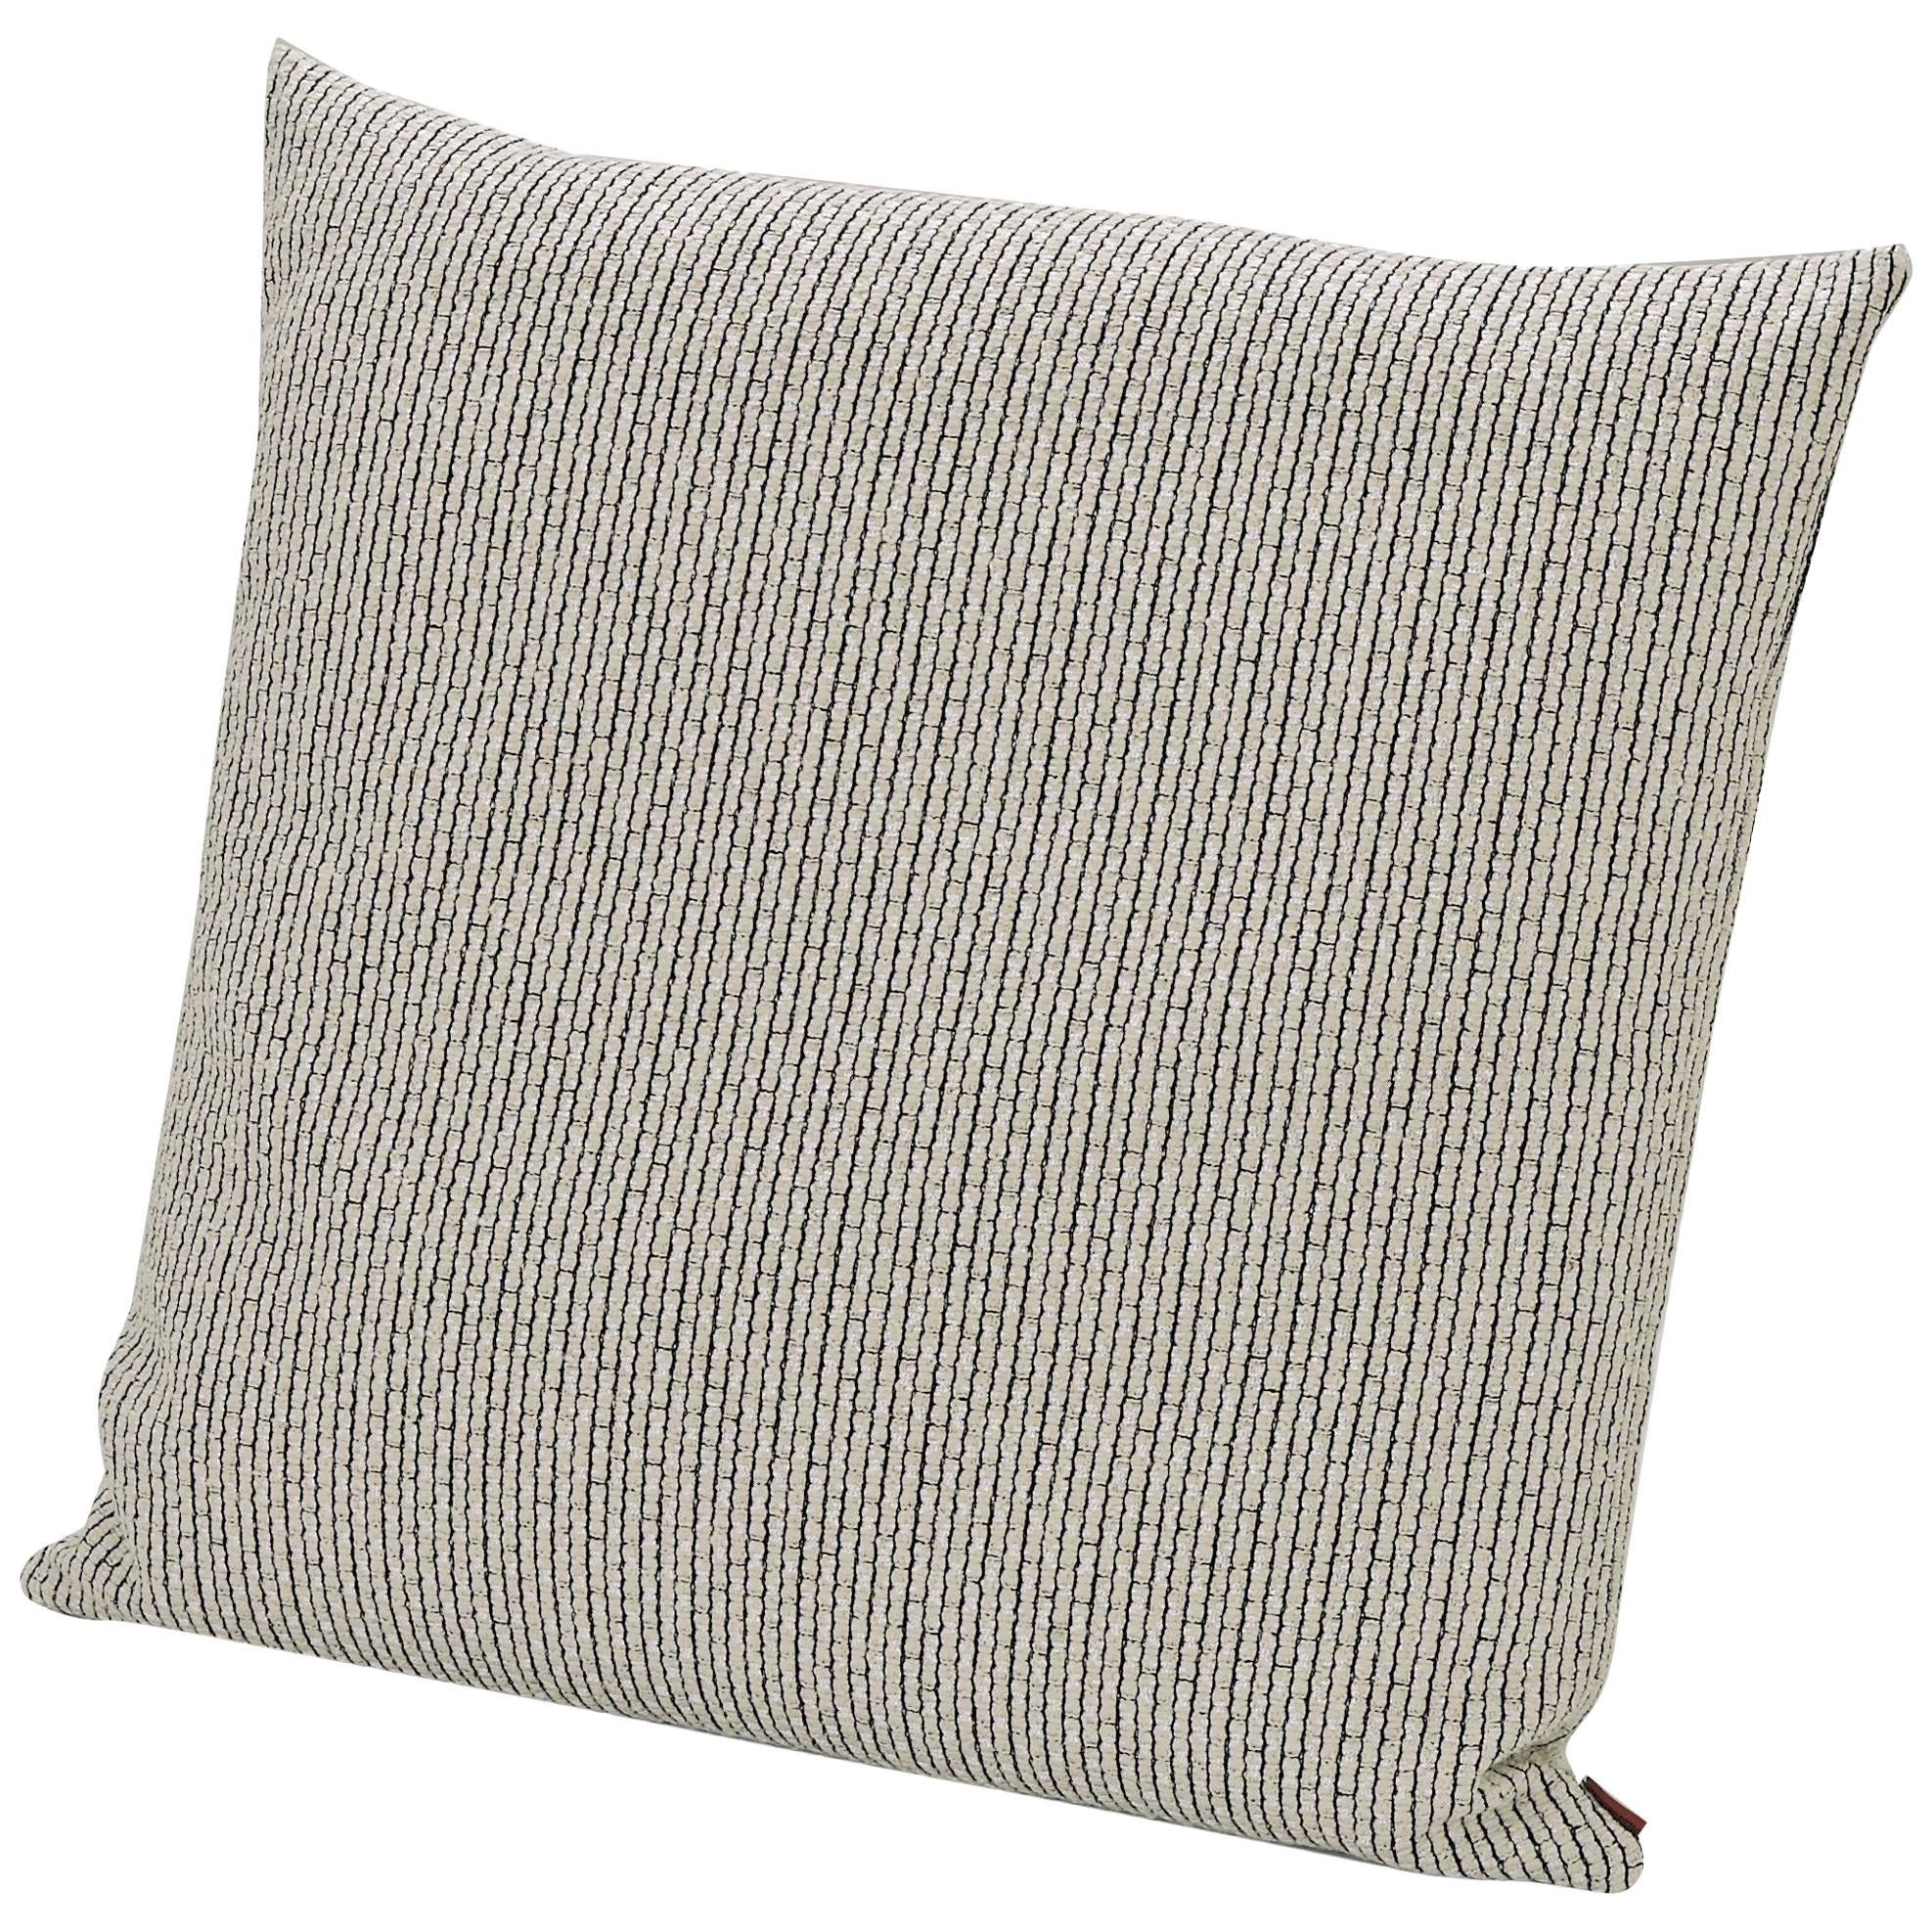 Missoni Home Reserva Cushion in Black and White with Textured Pattern For Sale